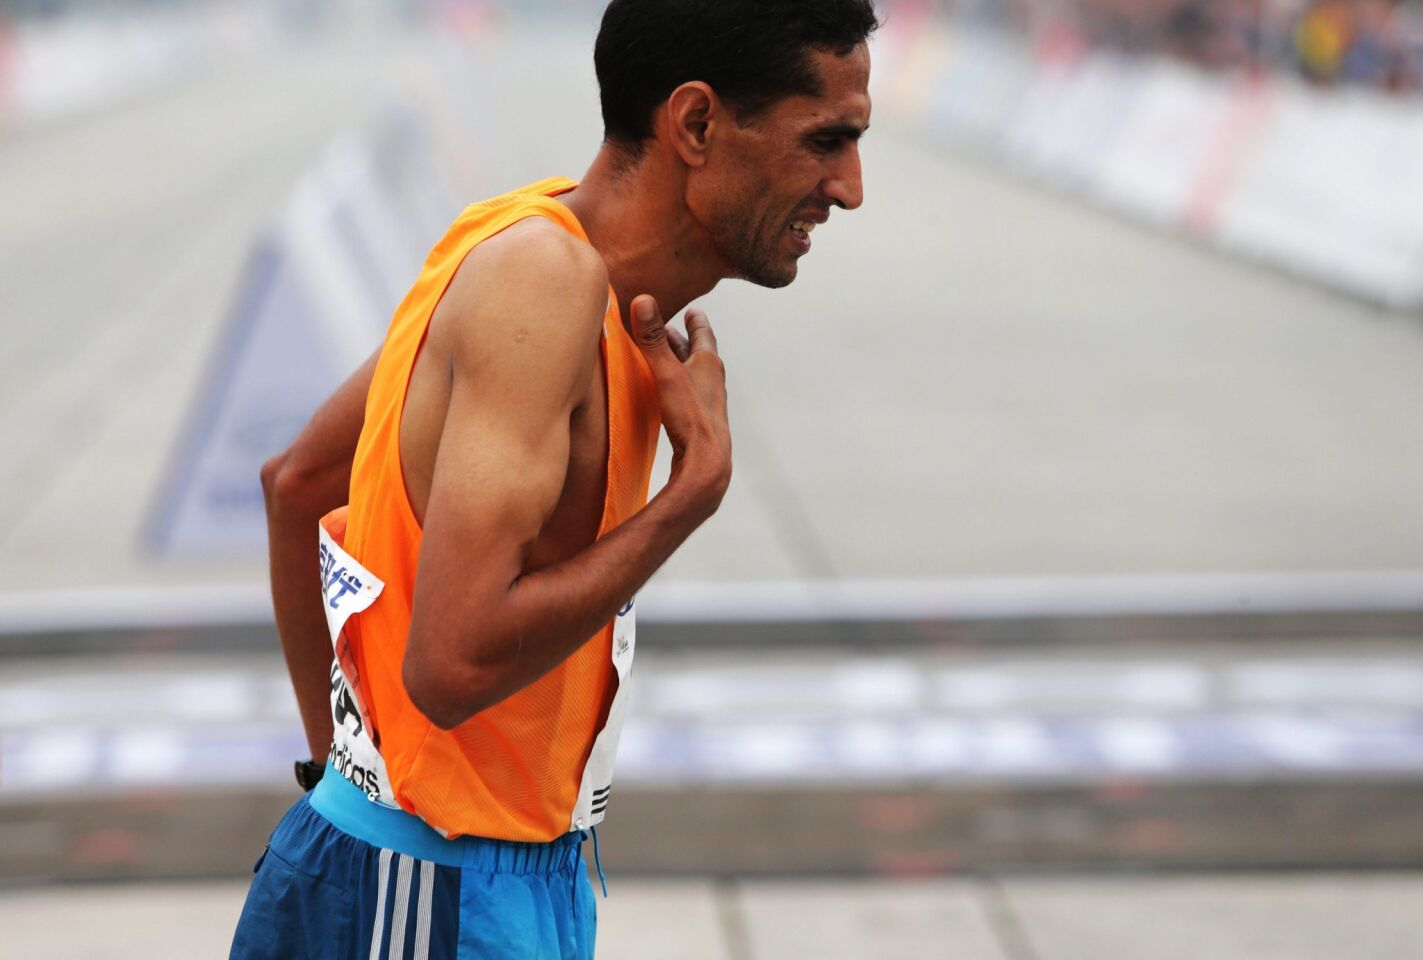 A professional runner has breathing difficulties during the Beijing Marathon. The smog forced some runners to quit the marathon.